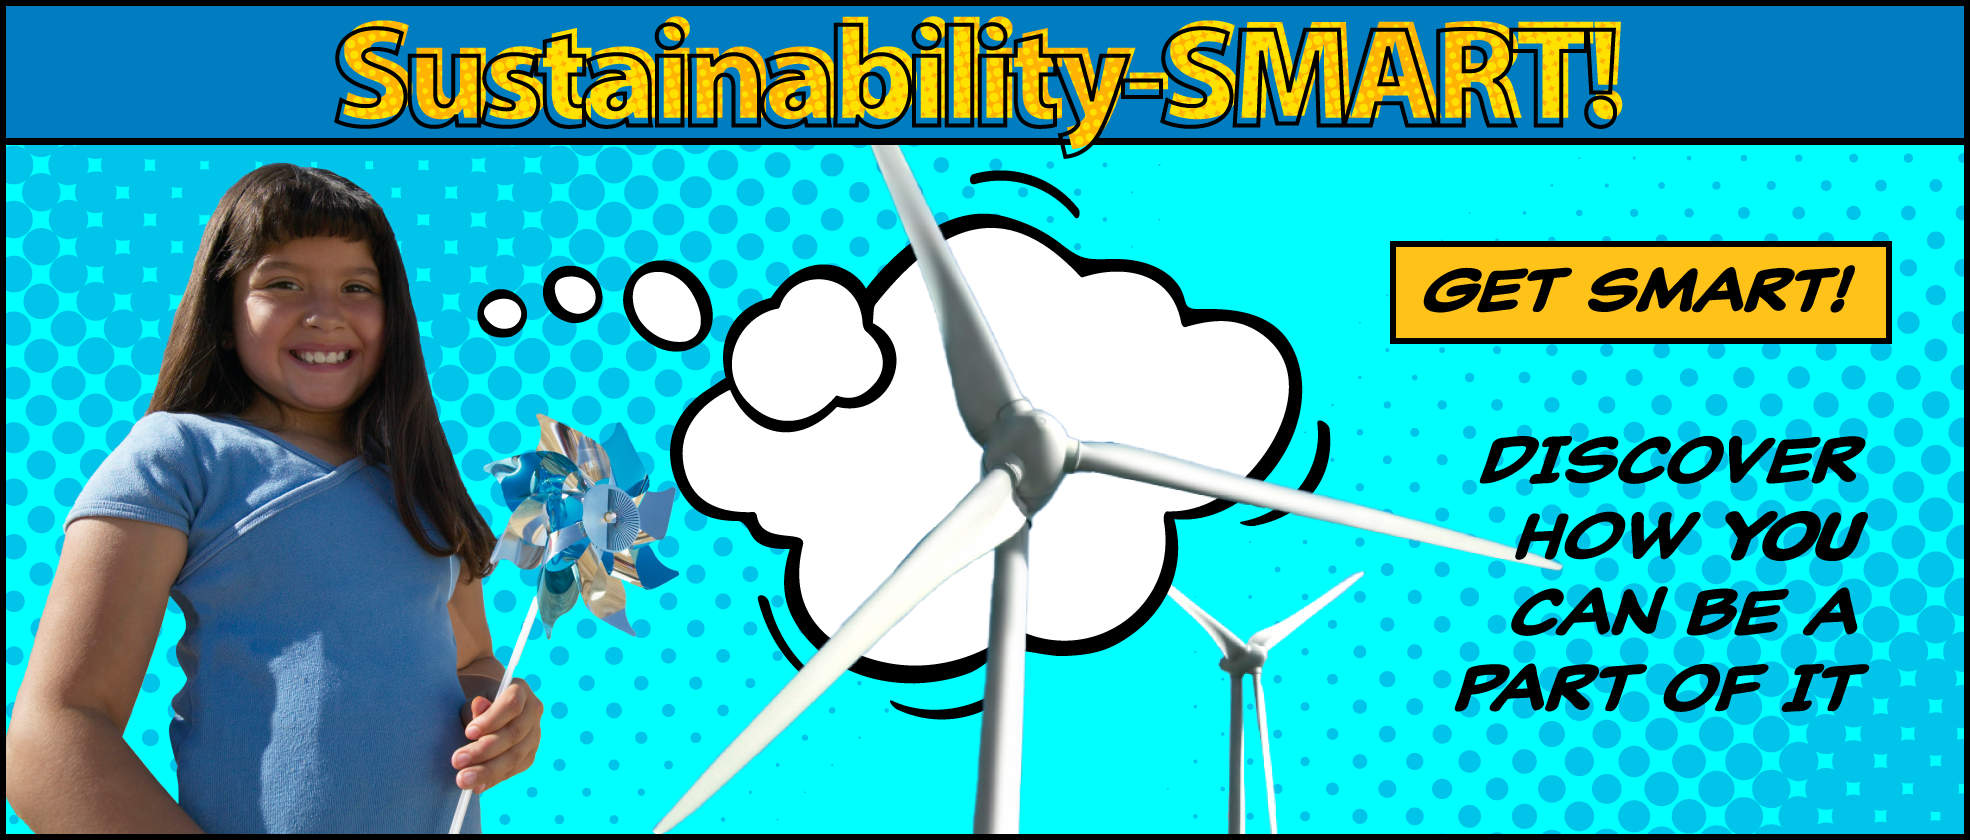 Sustainability-SMART: Get Smart! Discover how you can be a part of it